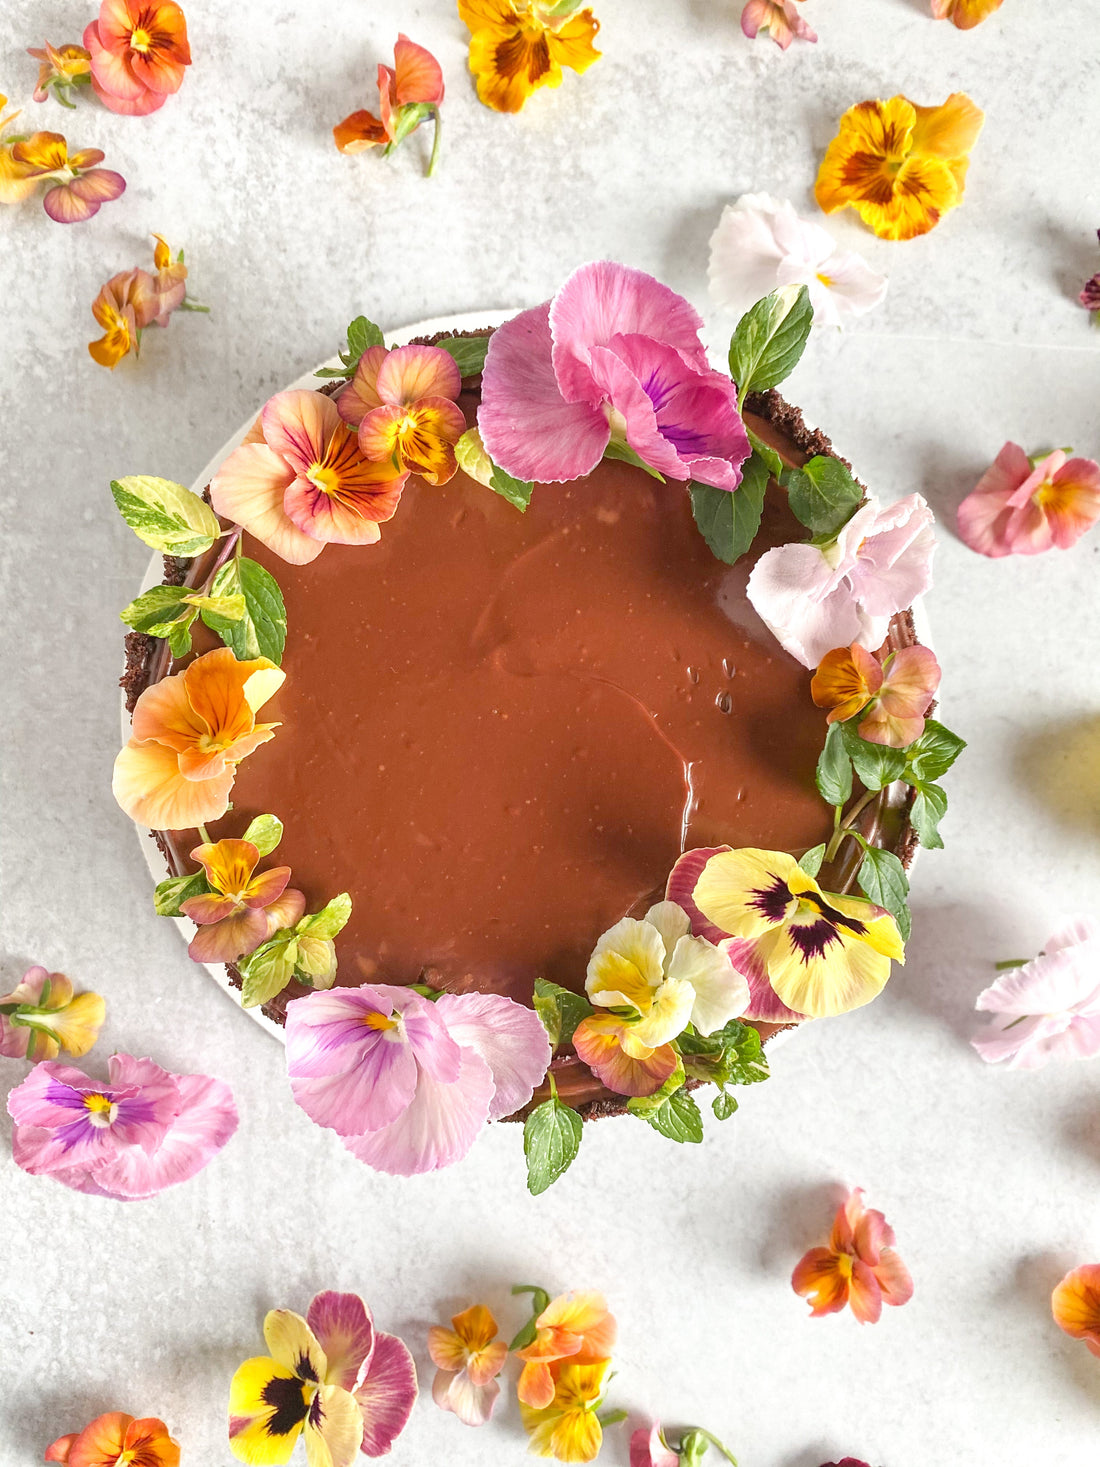 Top-down view of a cake covered in ganache and chocolate crumbs. The top of the cake is decorated with a crown of fresh flowers and greenery.